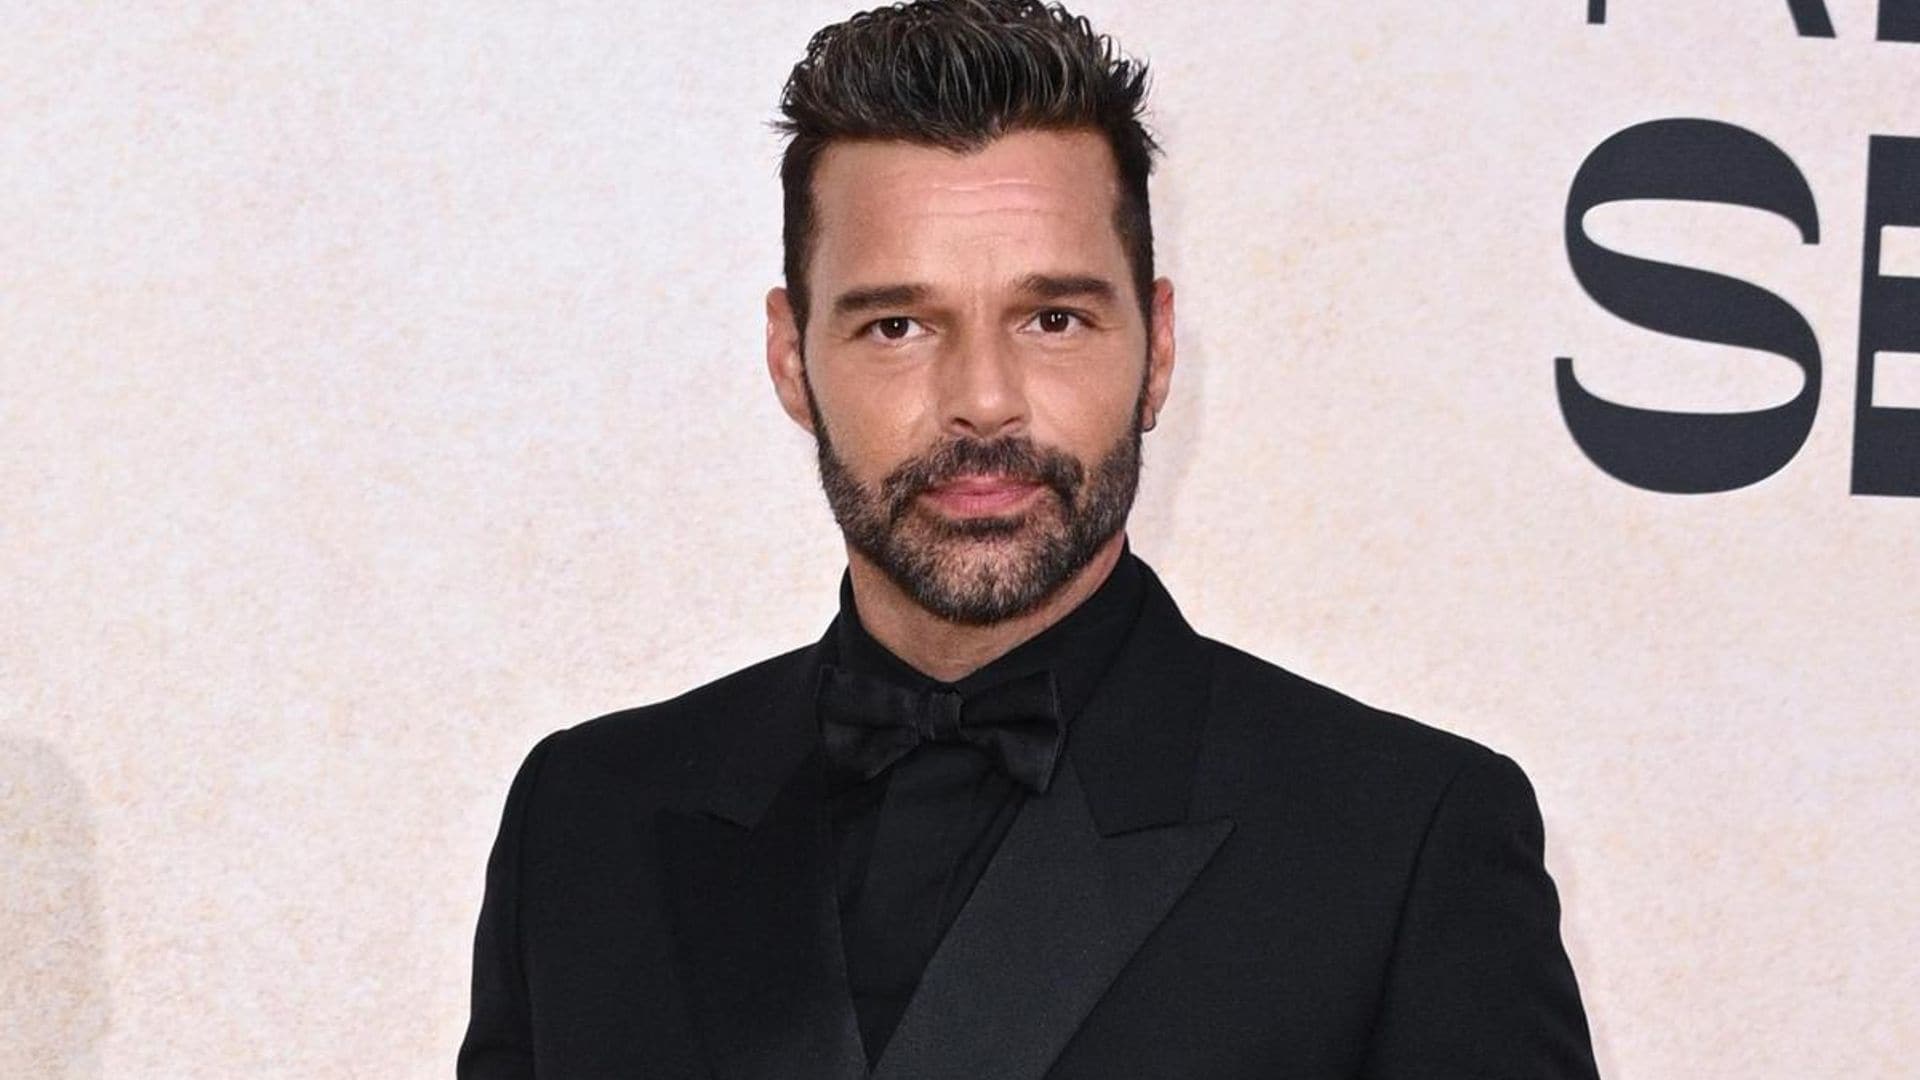 Ricky Martin talks about his relationship with his ex-husband, Jwan Yosef, a year after their divorce